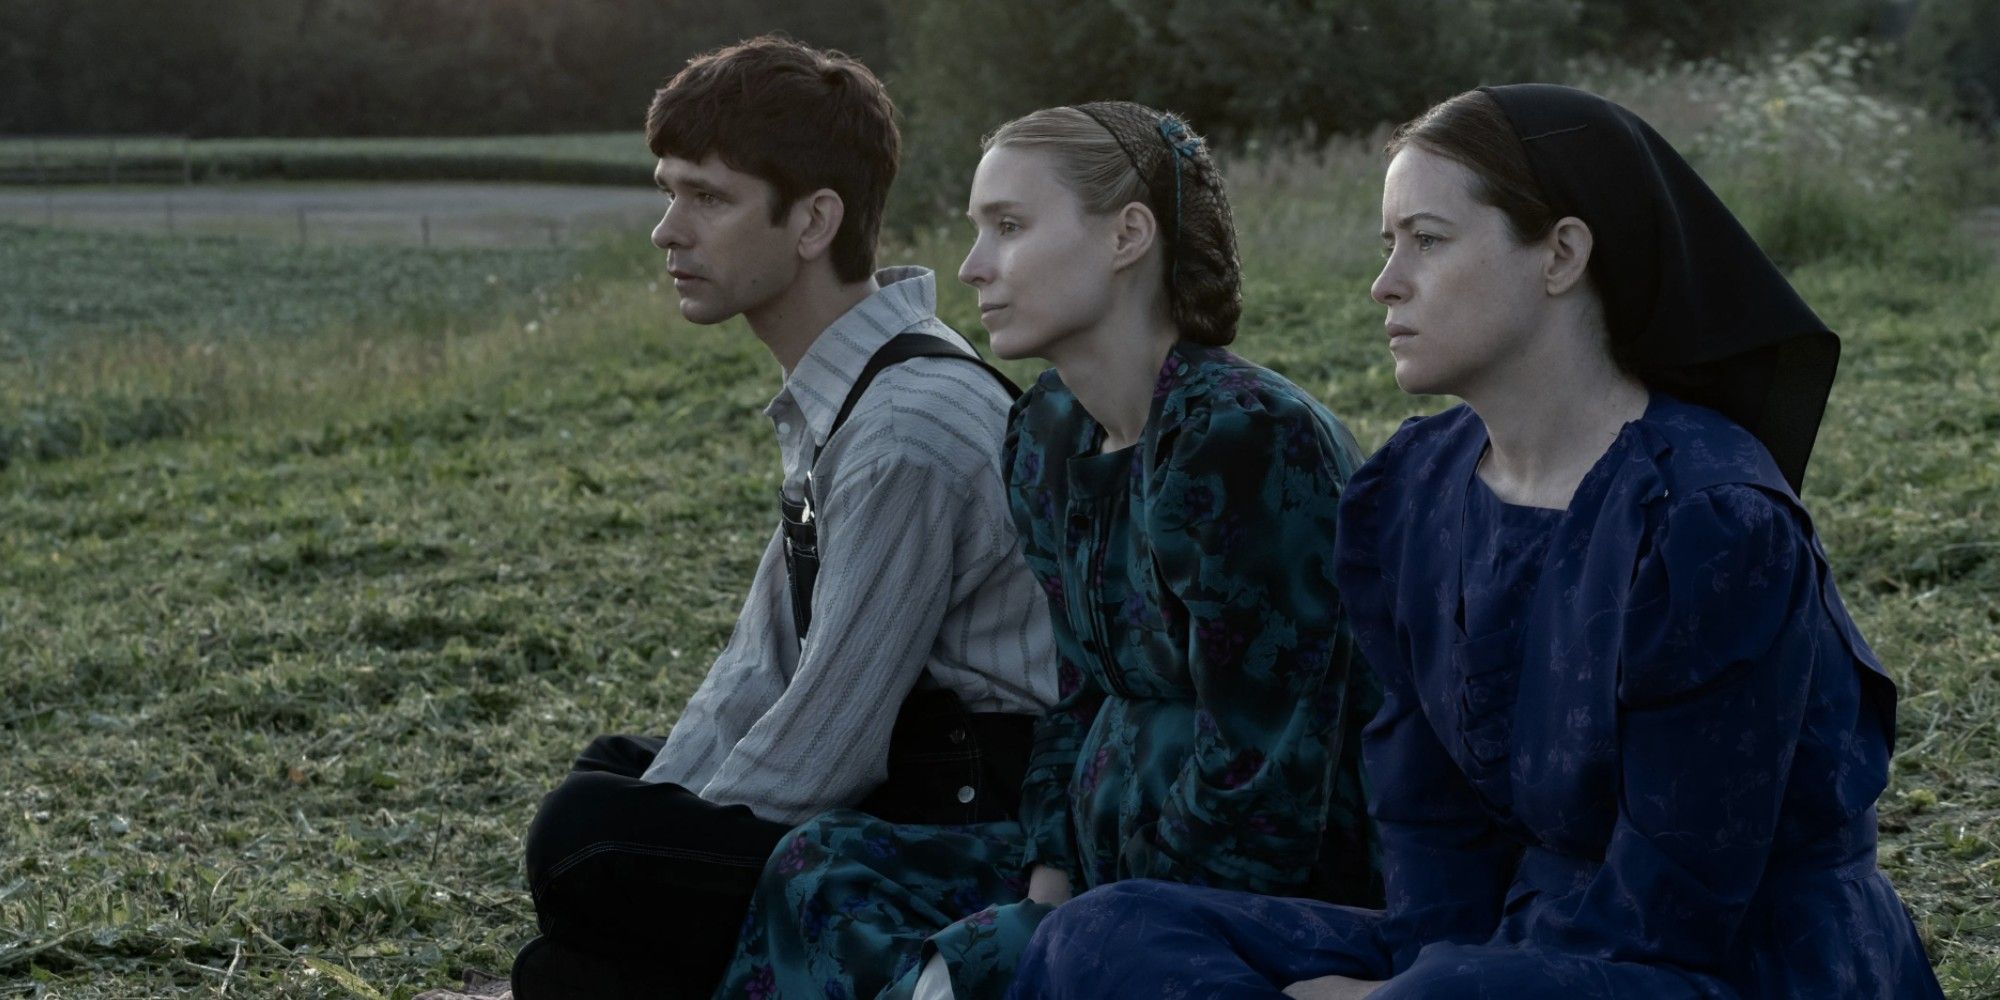 Claire Foy, Rooney Mara and Ben Whishaw in 